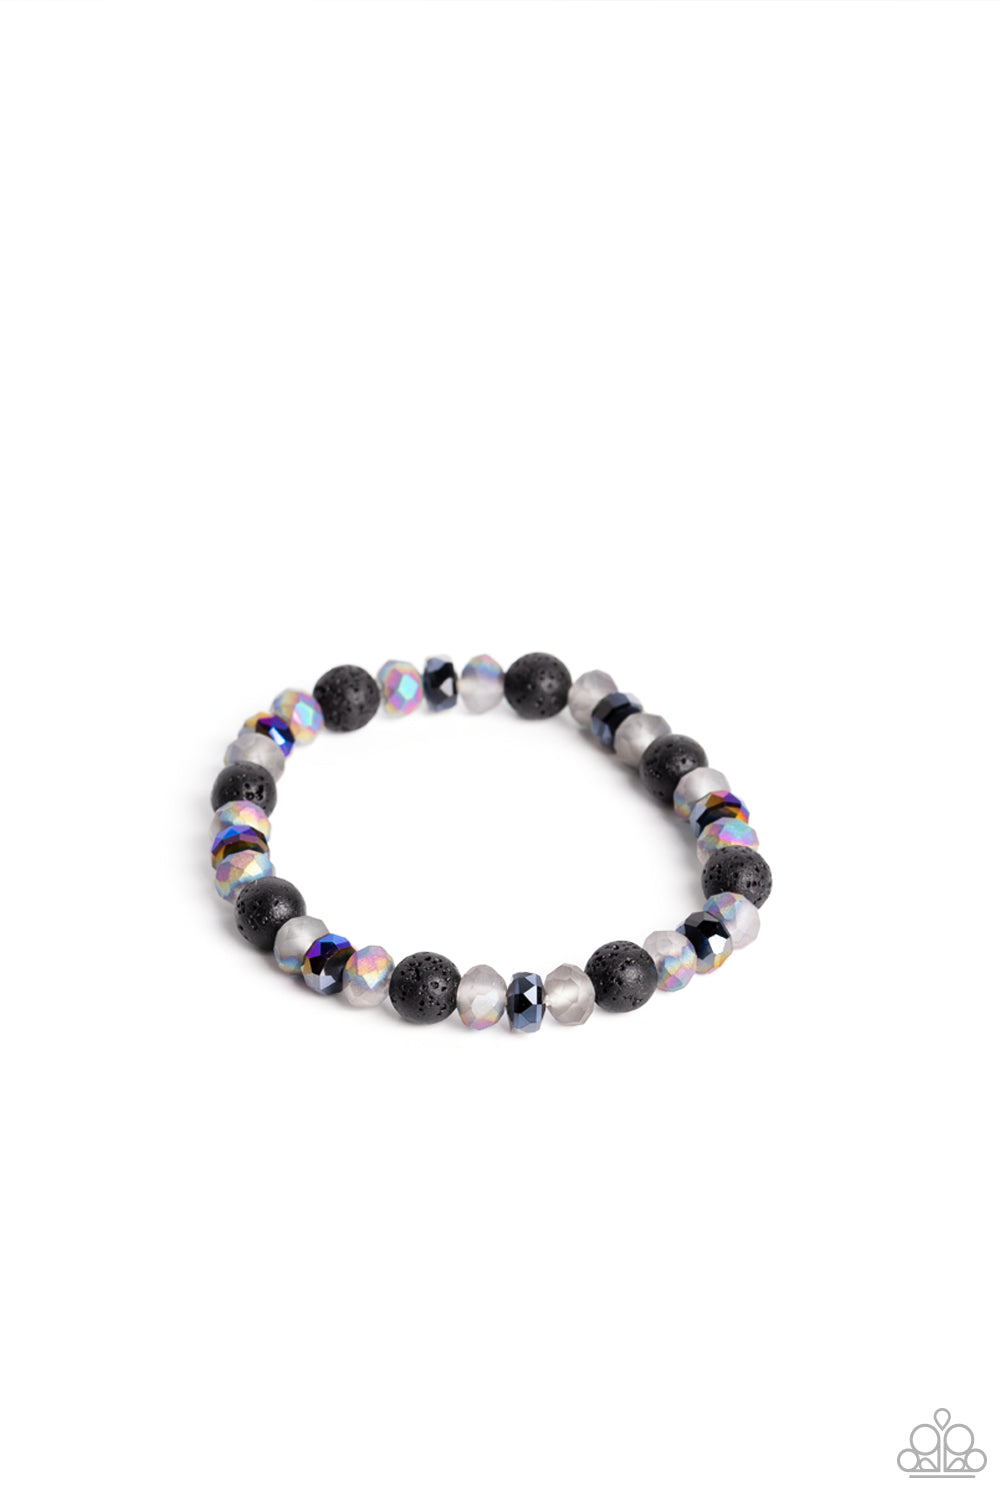 Endless LAVA Multi Stretch Bracelet - Paparazzi Accessories  An earthy collection of black lava rock beads, oil spill disc beads, and faceted stones brushed in an oil spill shimmer are threaded along a stretchy band around the wrist, resulting in an edgy stellar look. Due to its prismatic palette, color may vary. As the stone elements in this piece are natural, some color variation is normal.  Sold as one individual bracelet.  P9SE-URMT-265XX